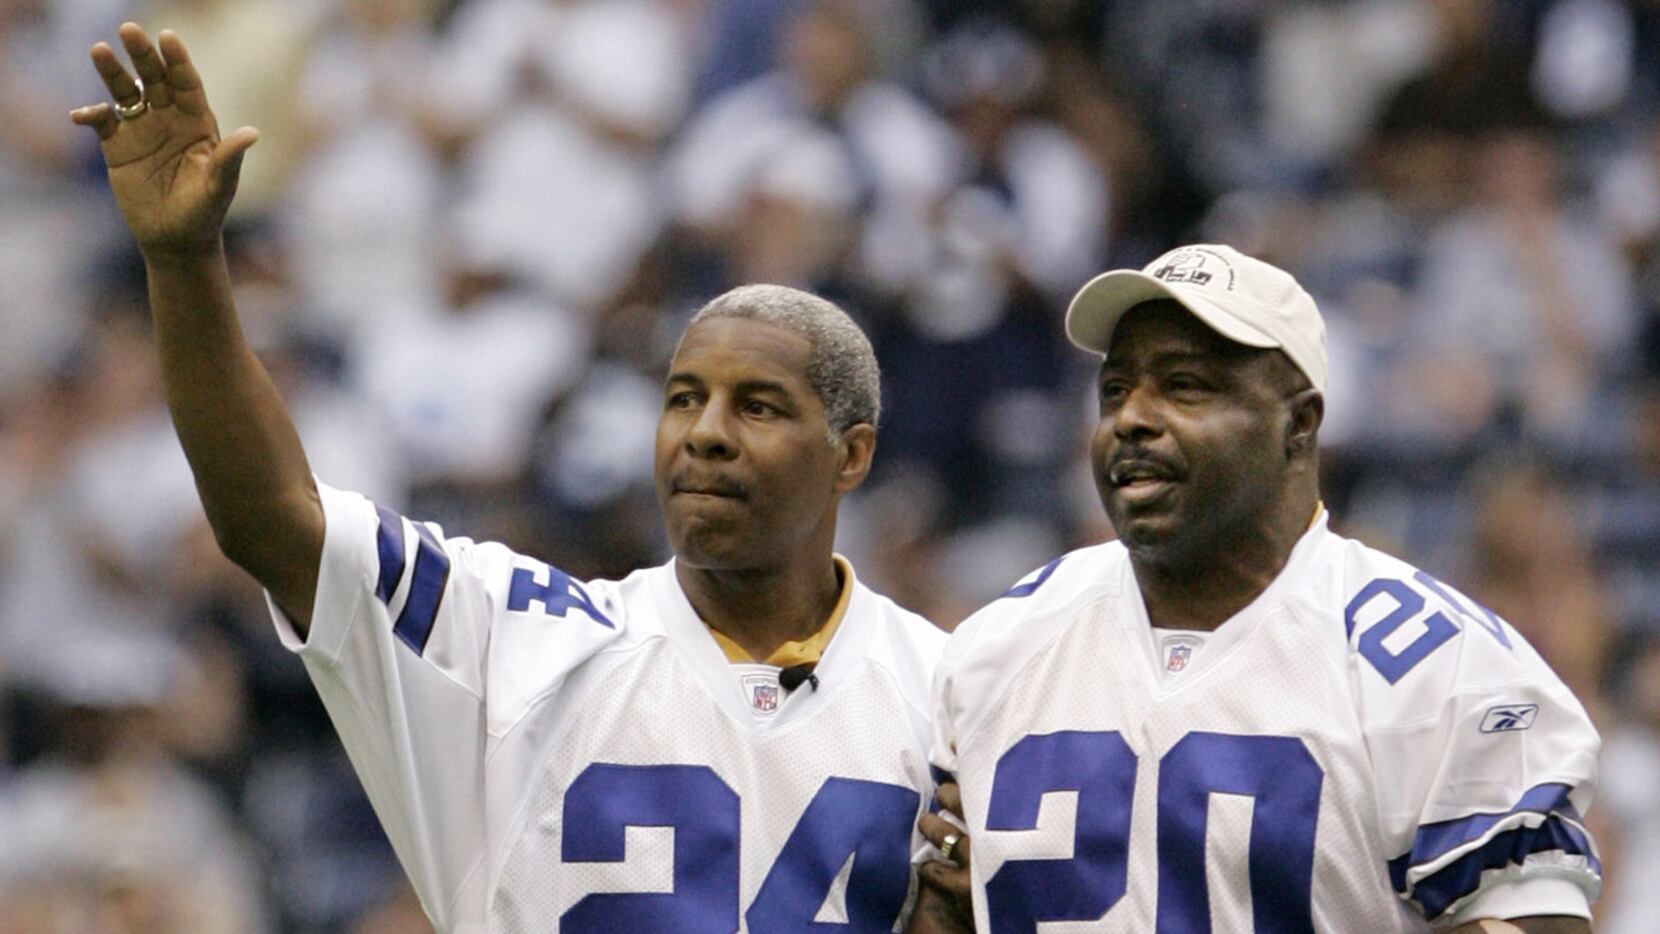 Everson Walls mourns at funeral of Cowboys teammate Ron Springs